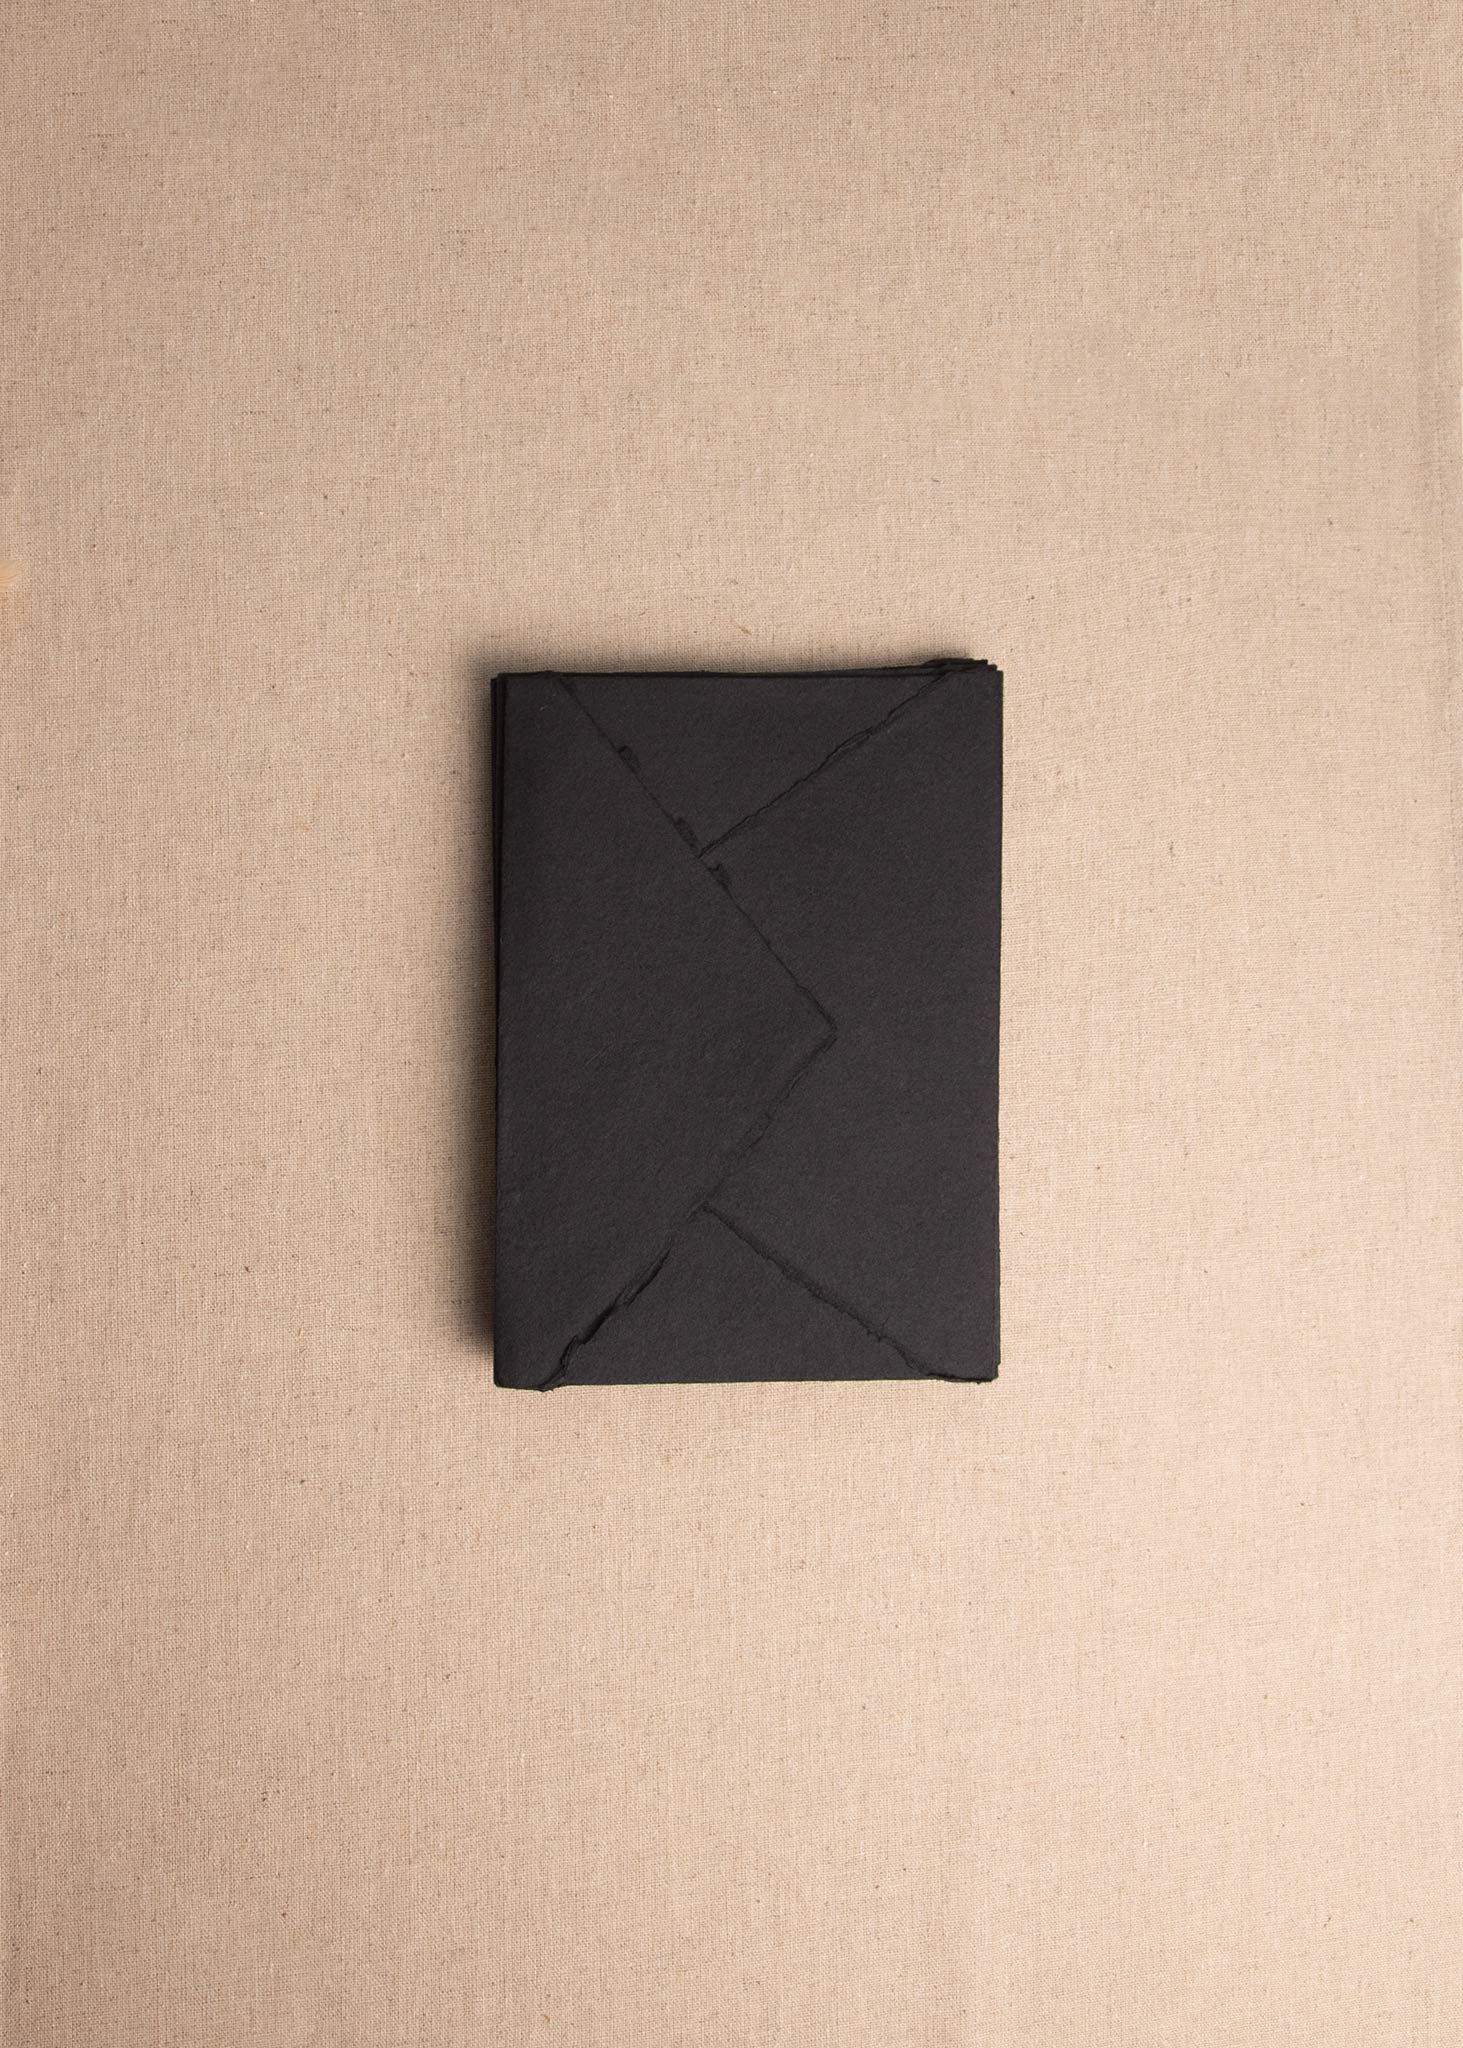 A6 Black Handmade paper envelope with deckle edge